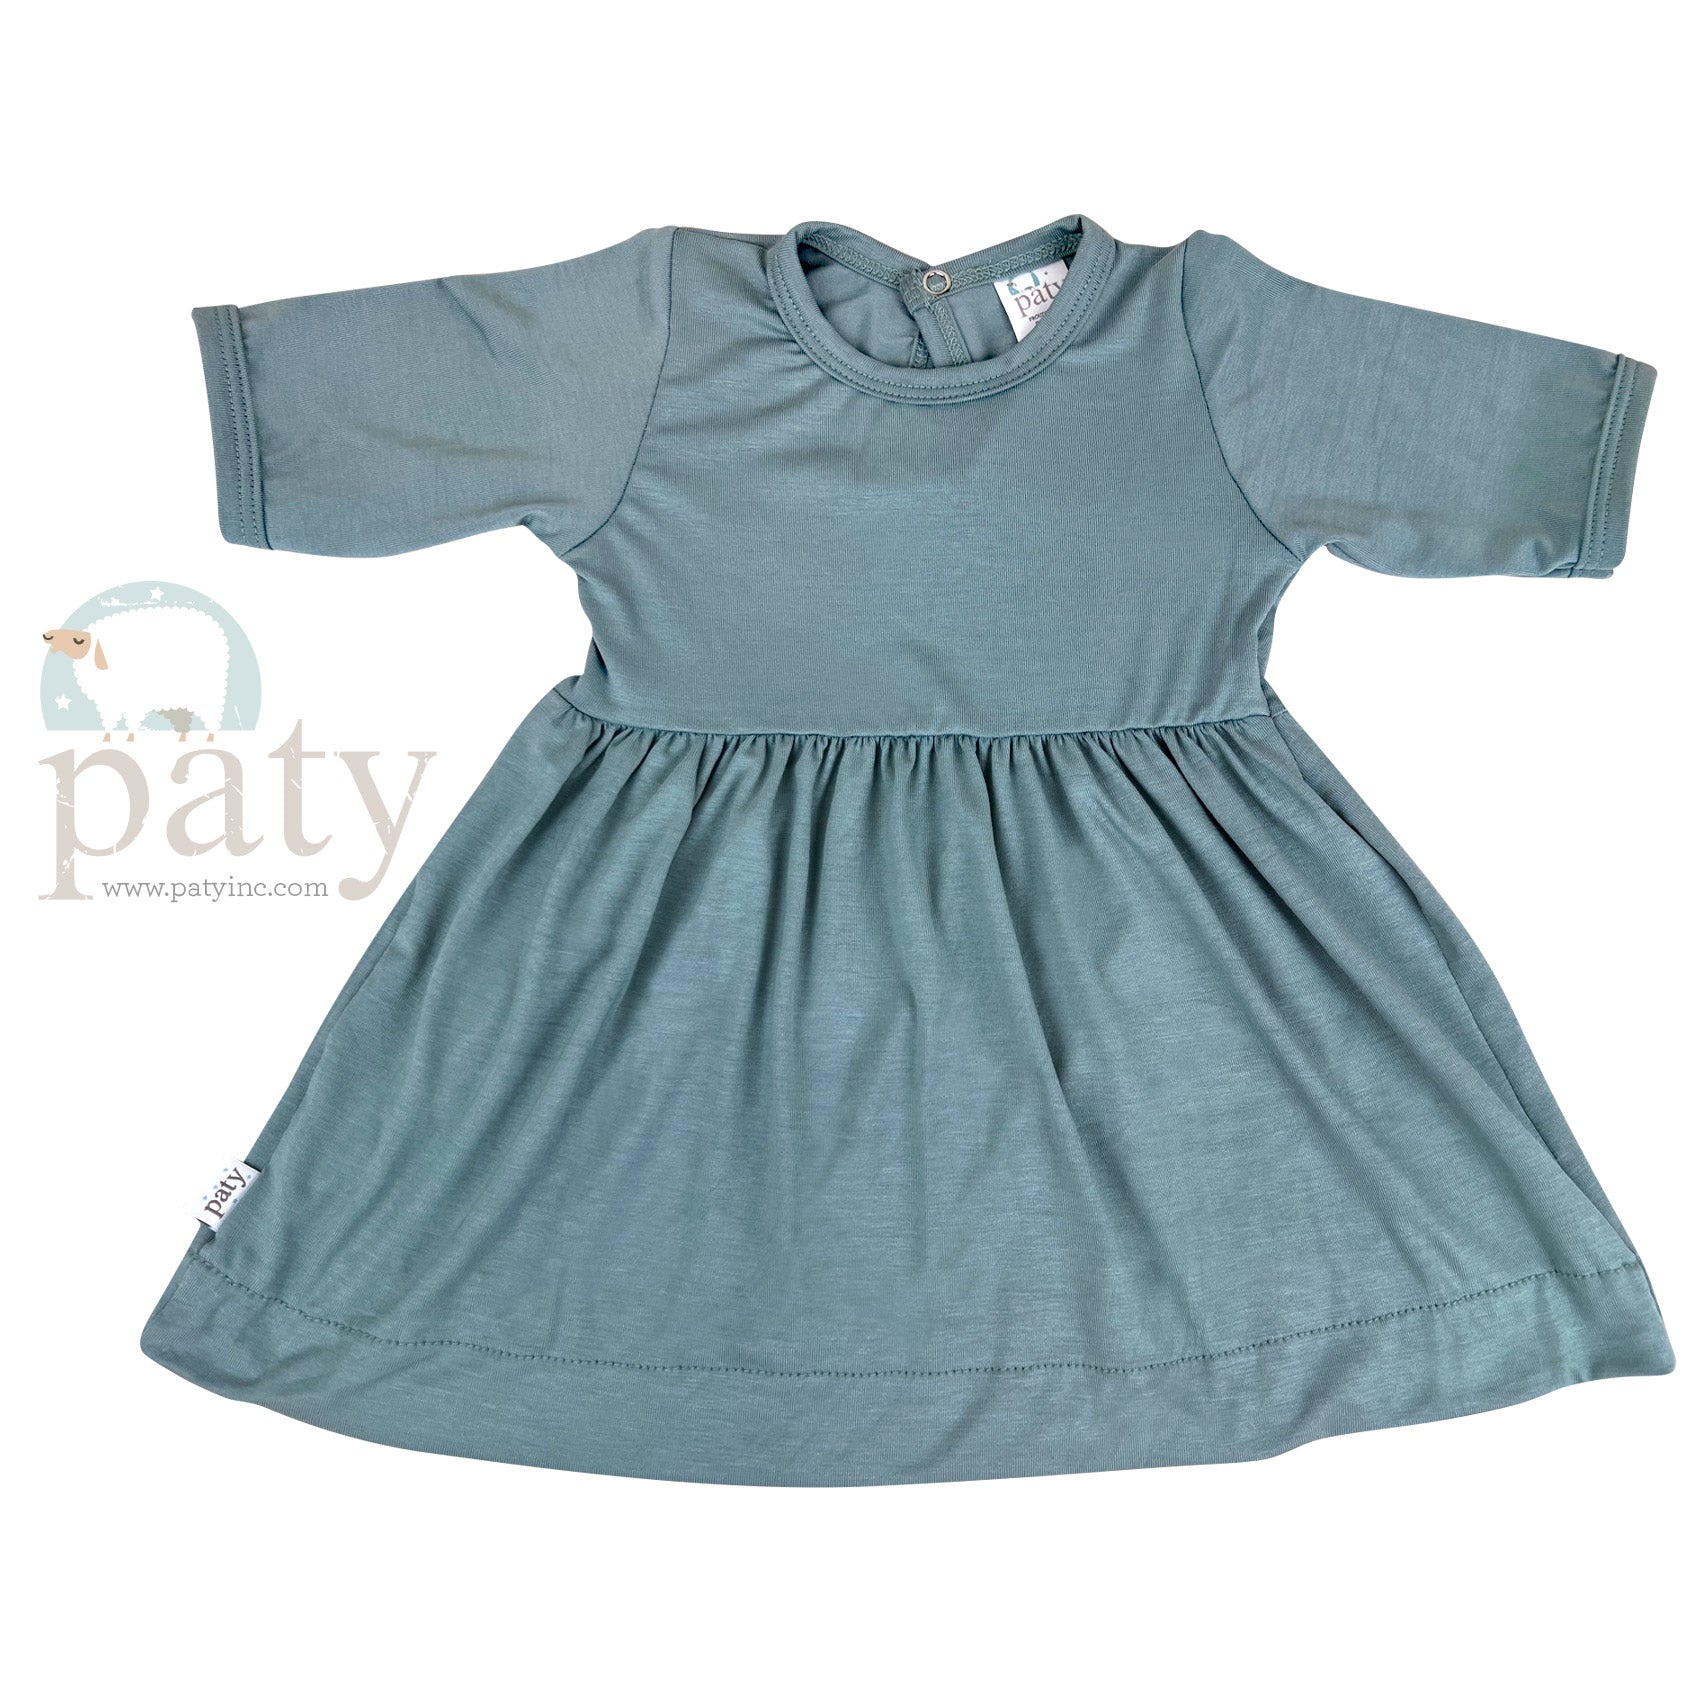 A baby girl's blue Paty Bamboo Dress on a white background.